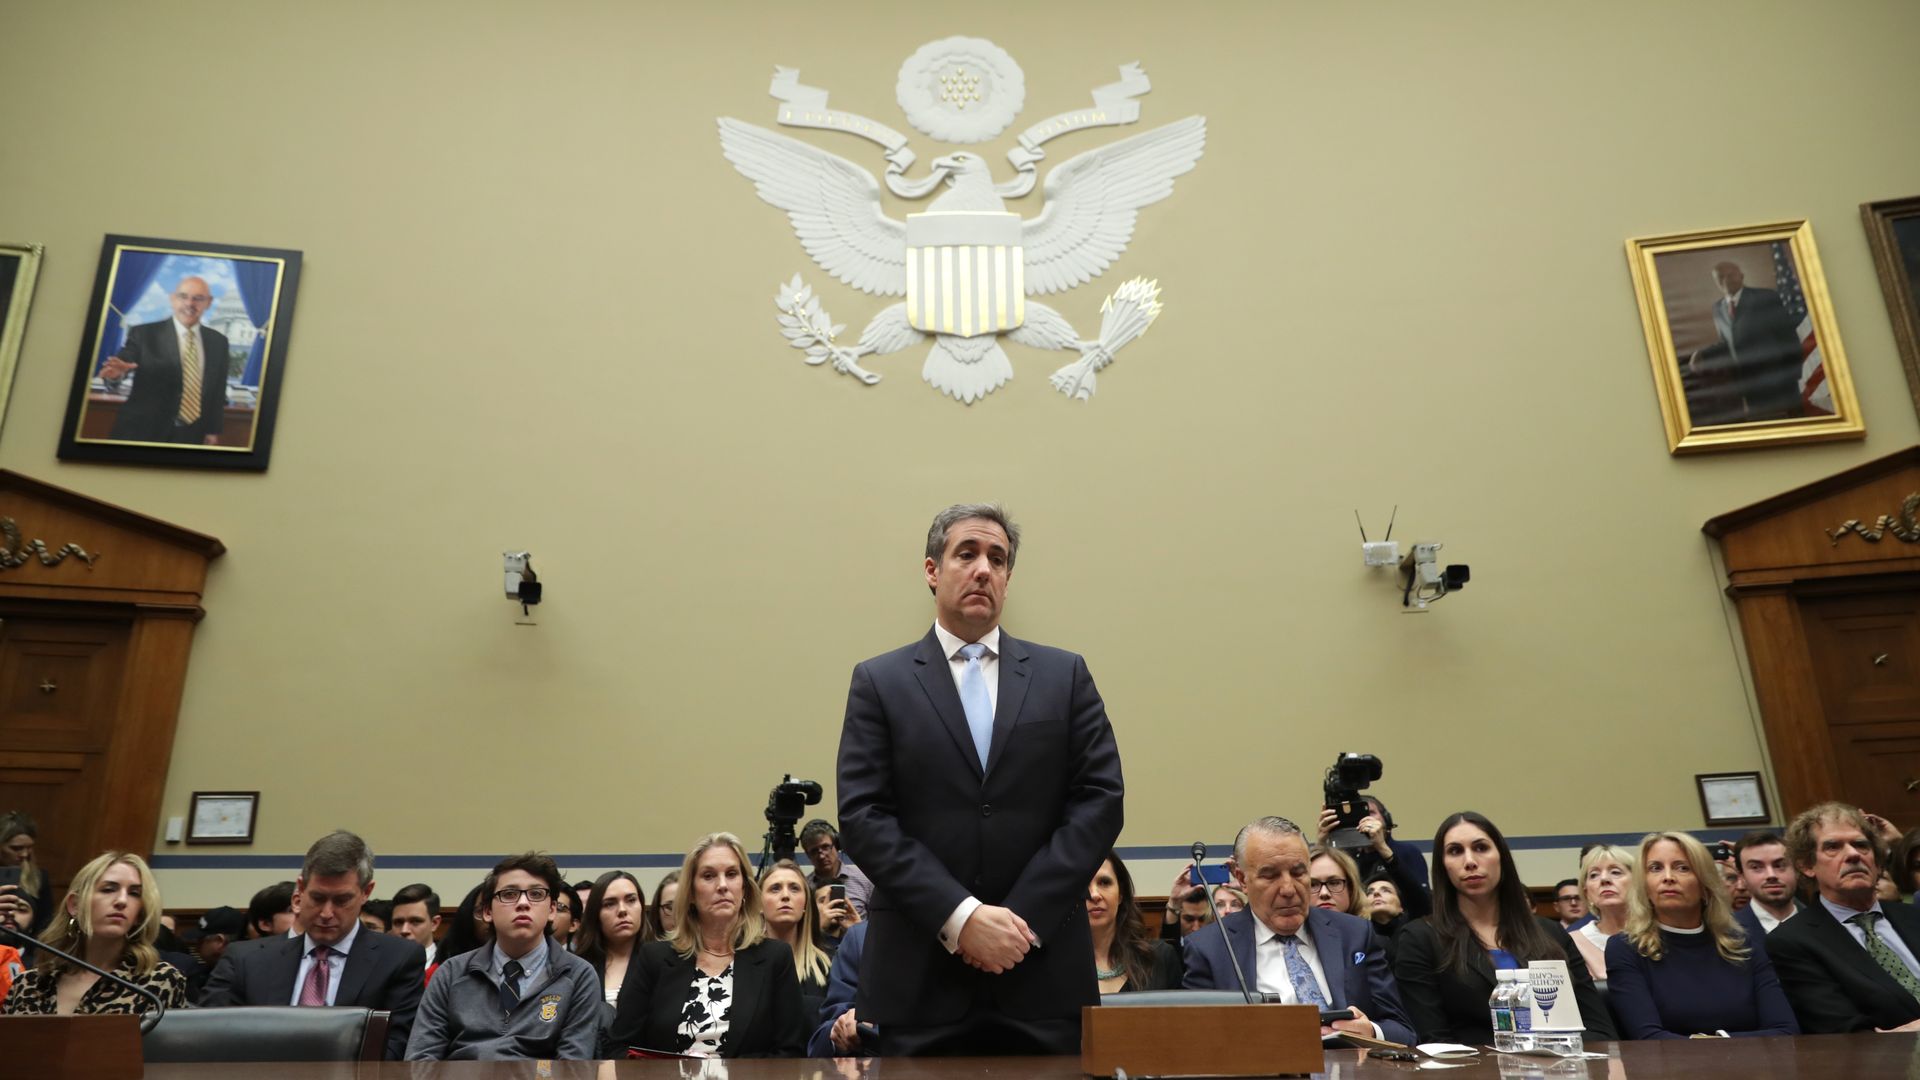 In this image, Michael Cohen stands with his hands folded in court and looks down. 